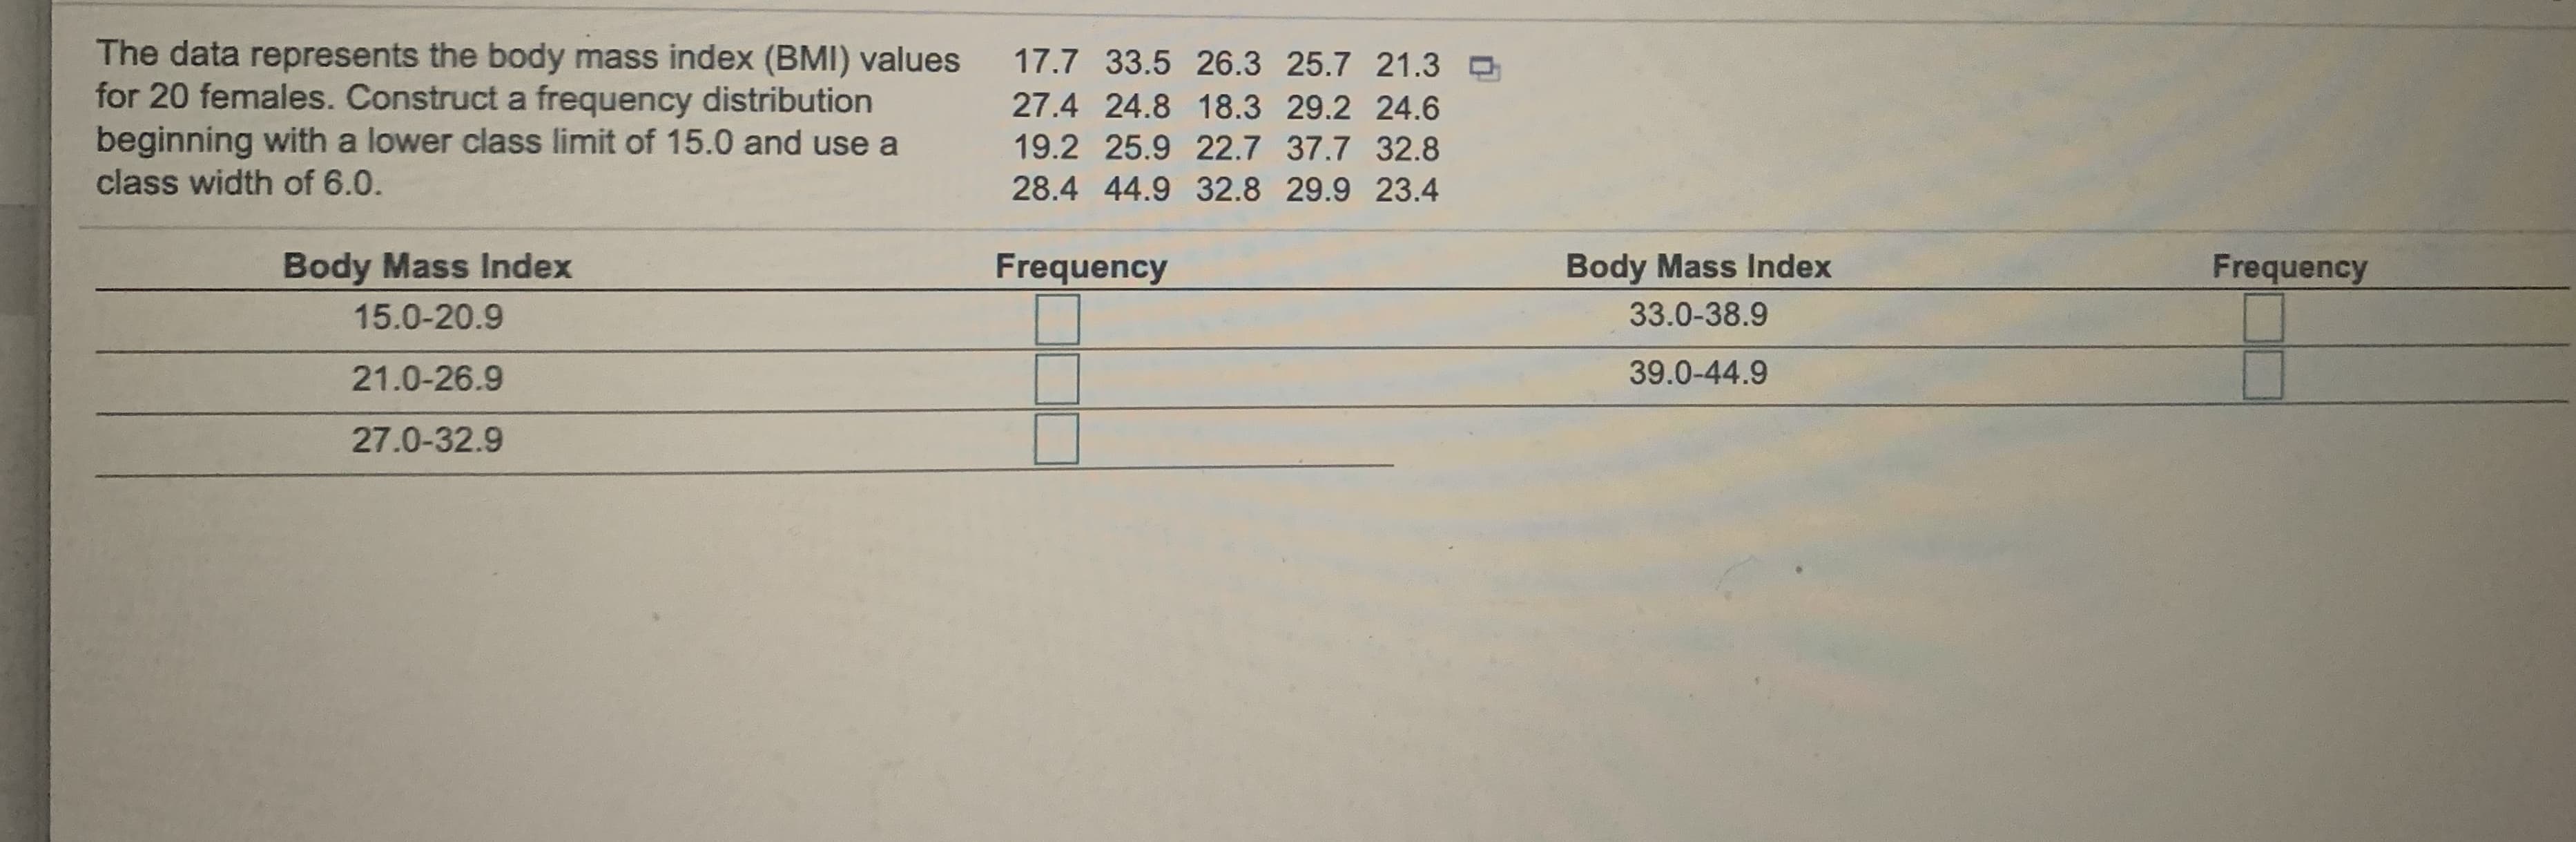 The data represents the body mass index (BMI) values
for 20 females. Construct a frequency distribution
beginning with a lower class limit of 15.0 and use a
class width of 6.0.
17.7 33.5 26.3 25.7 21.3
27.4 24.8 18.3 29.2 24.6
19.2 25.9 22.7 37.7 32.8
28.4 44.9 32.8 29.9 23.4
Body Mass Index
Frequency
Body Mass Index
Frequency
15.0-20.9
33.0-38.9
21.0-26.9
39.0-44.9
27.0-32.9
